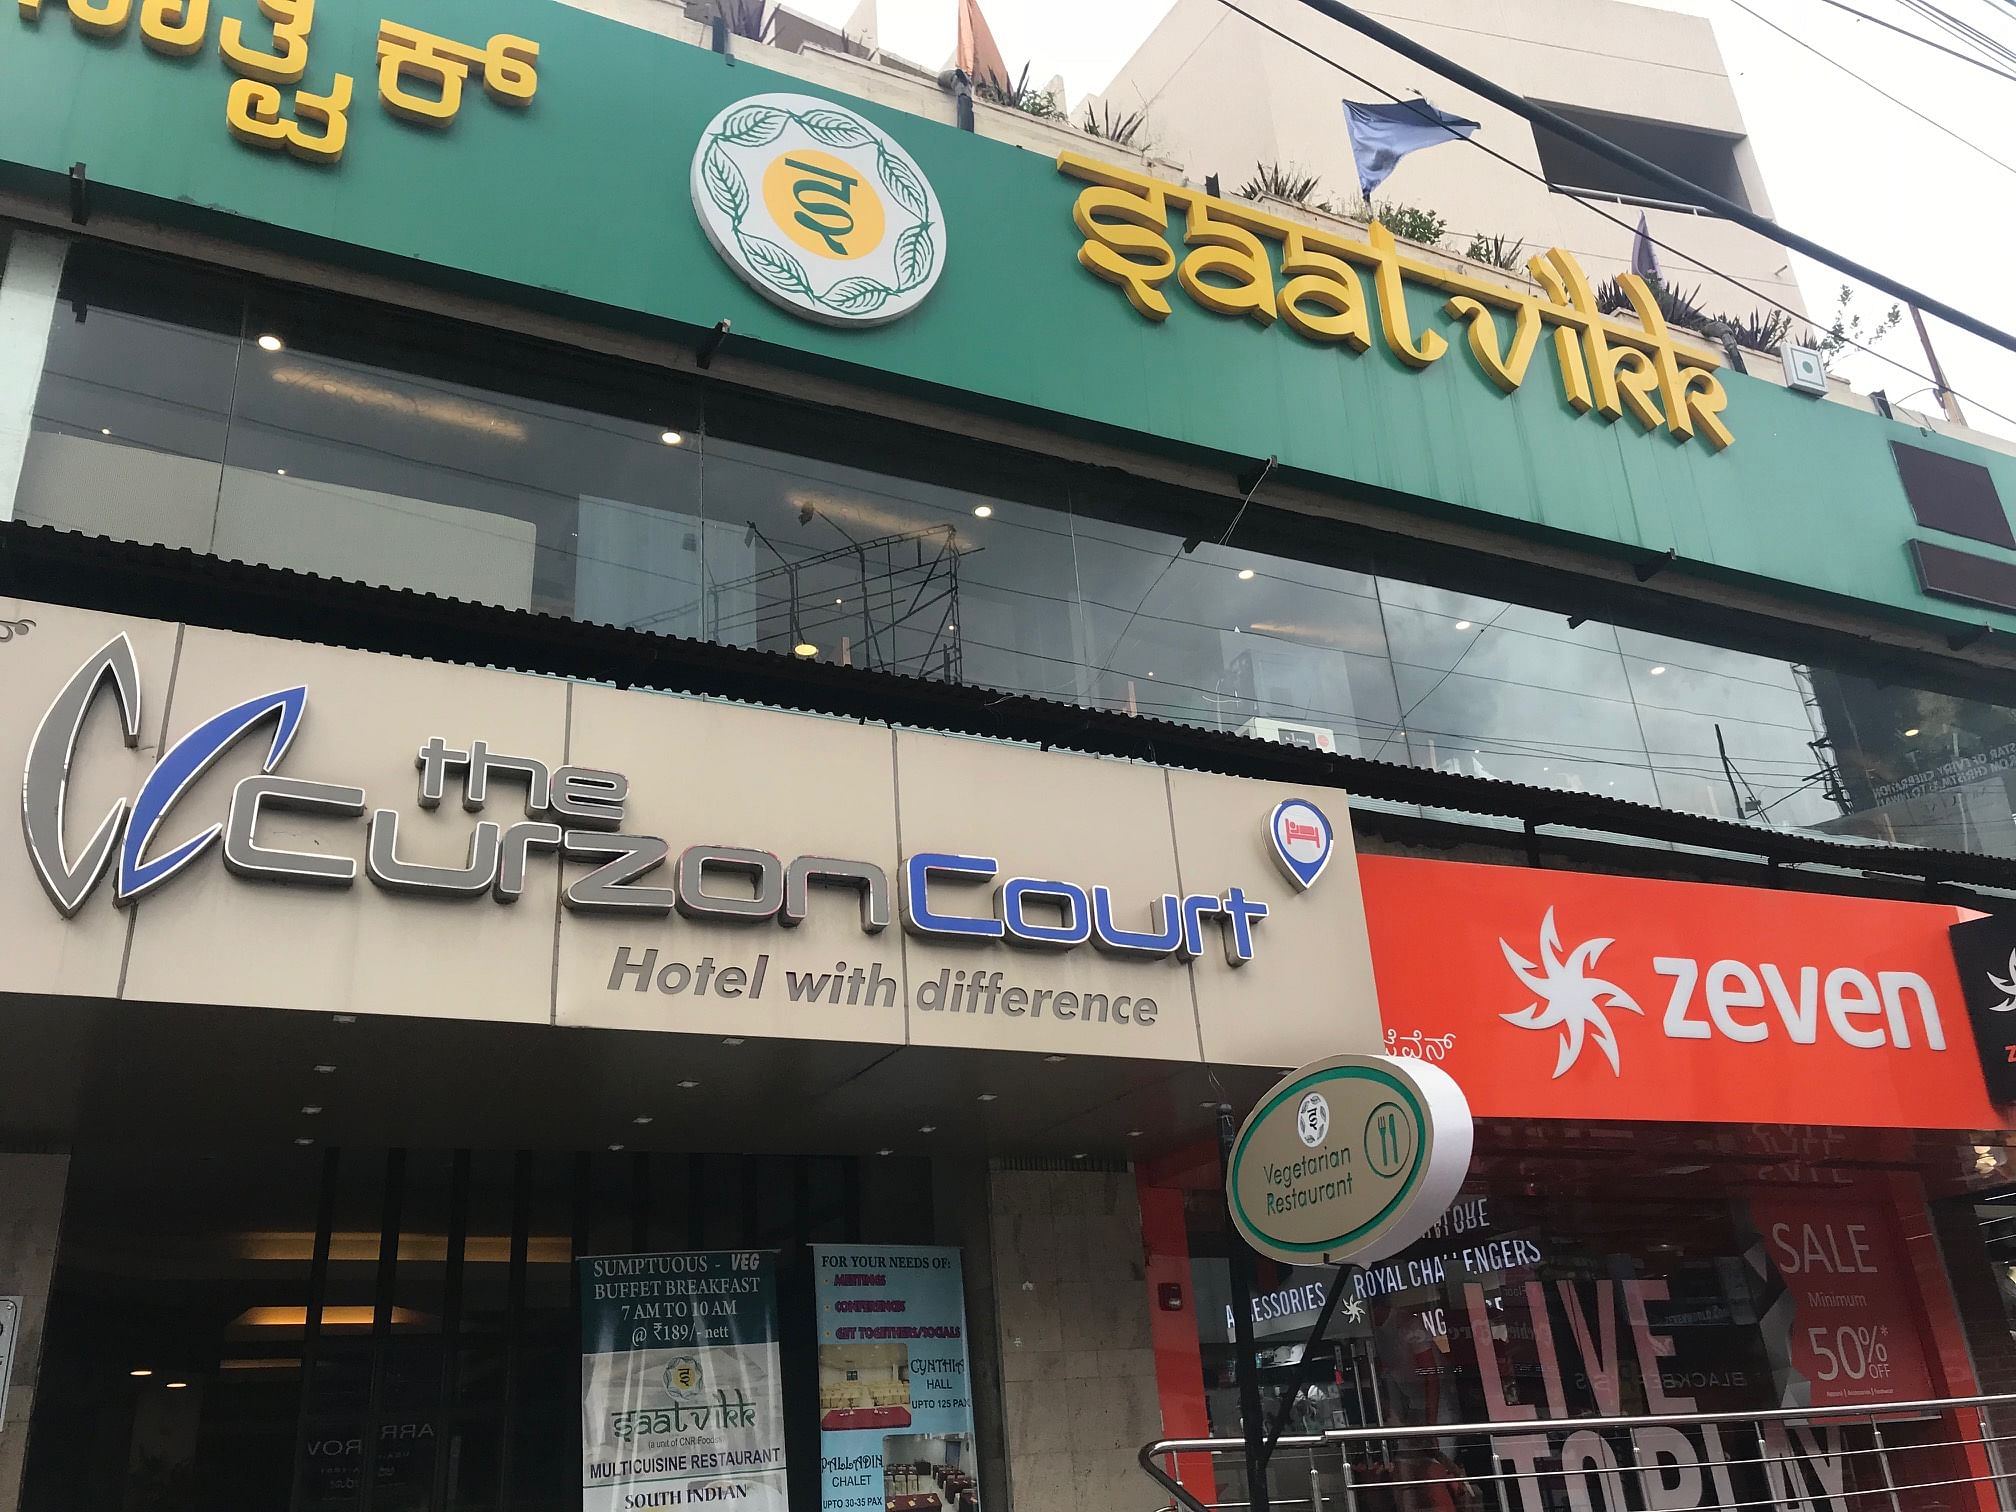 Saattvikk on Brigade Road charges 6%. If customers spot the charge and want it removed, the same is omitted, says the manager.